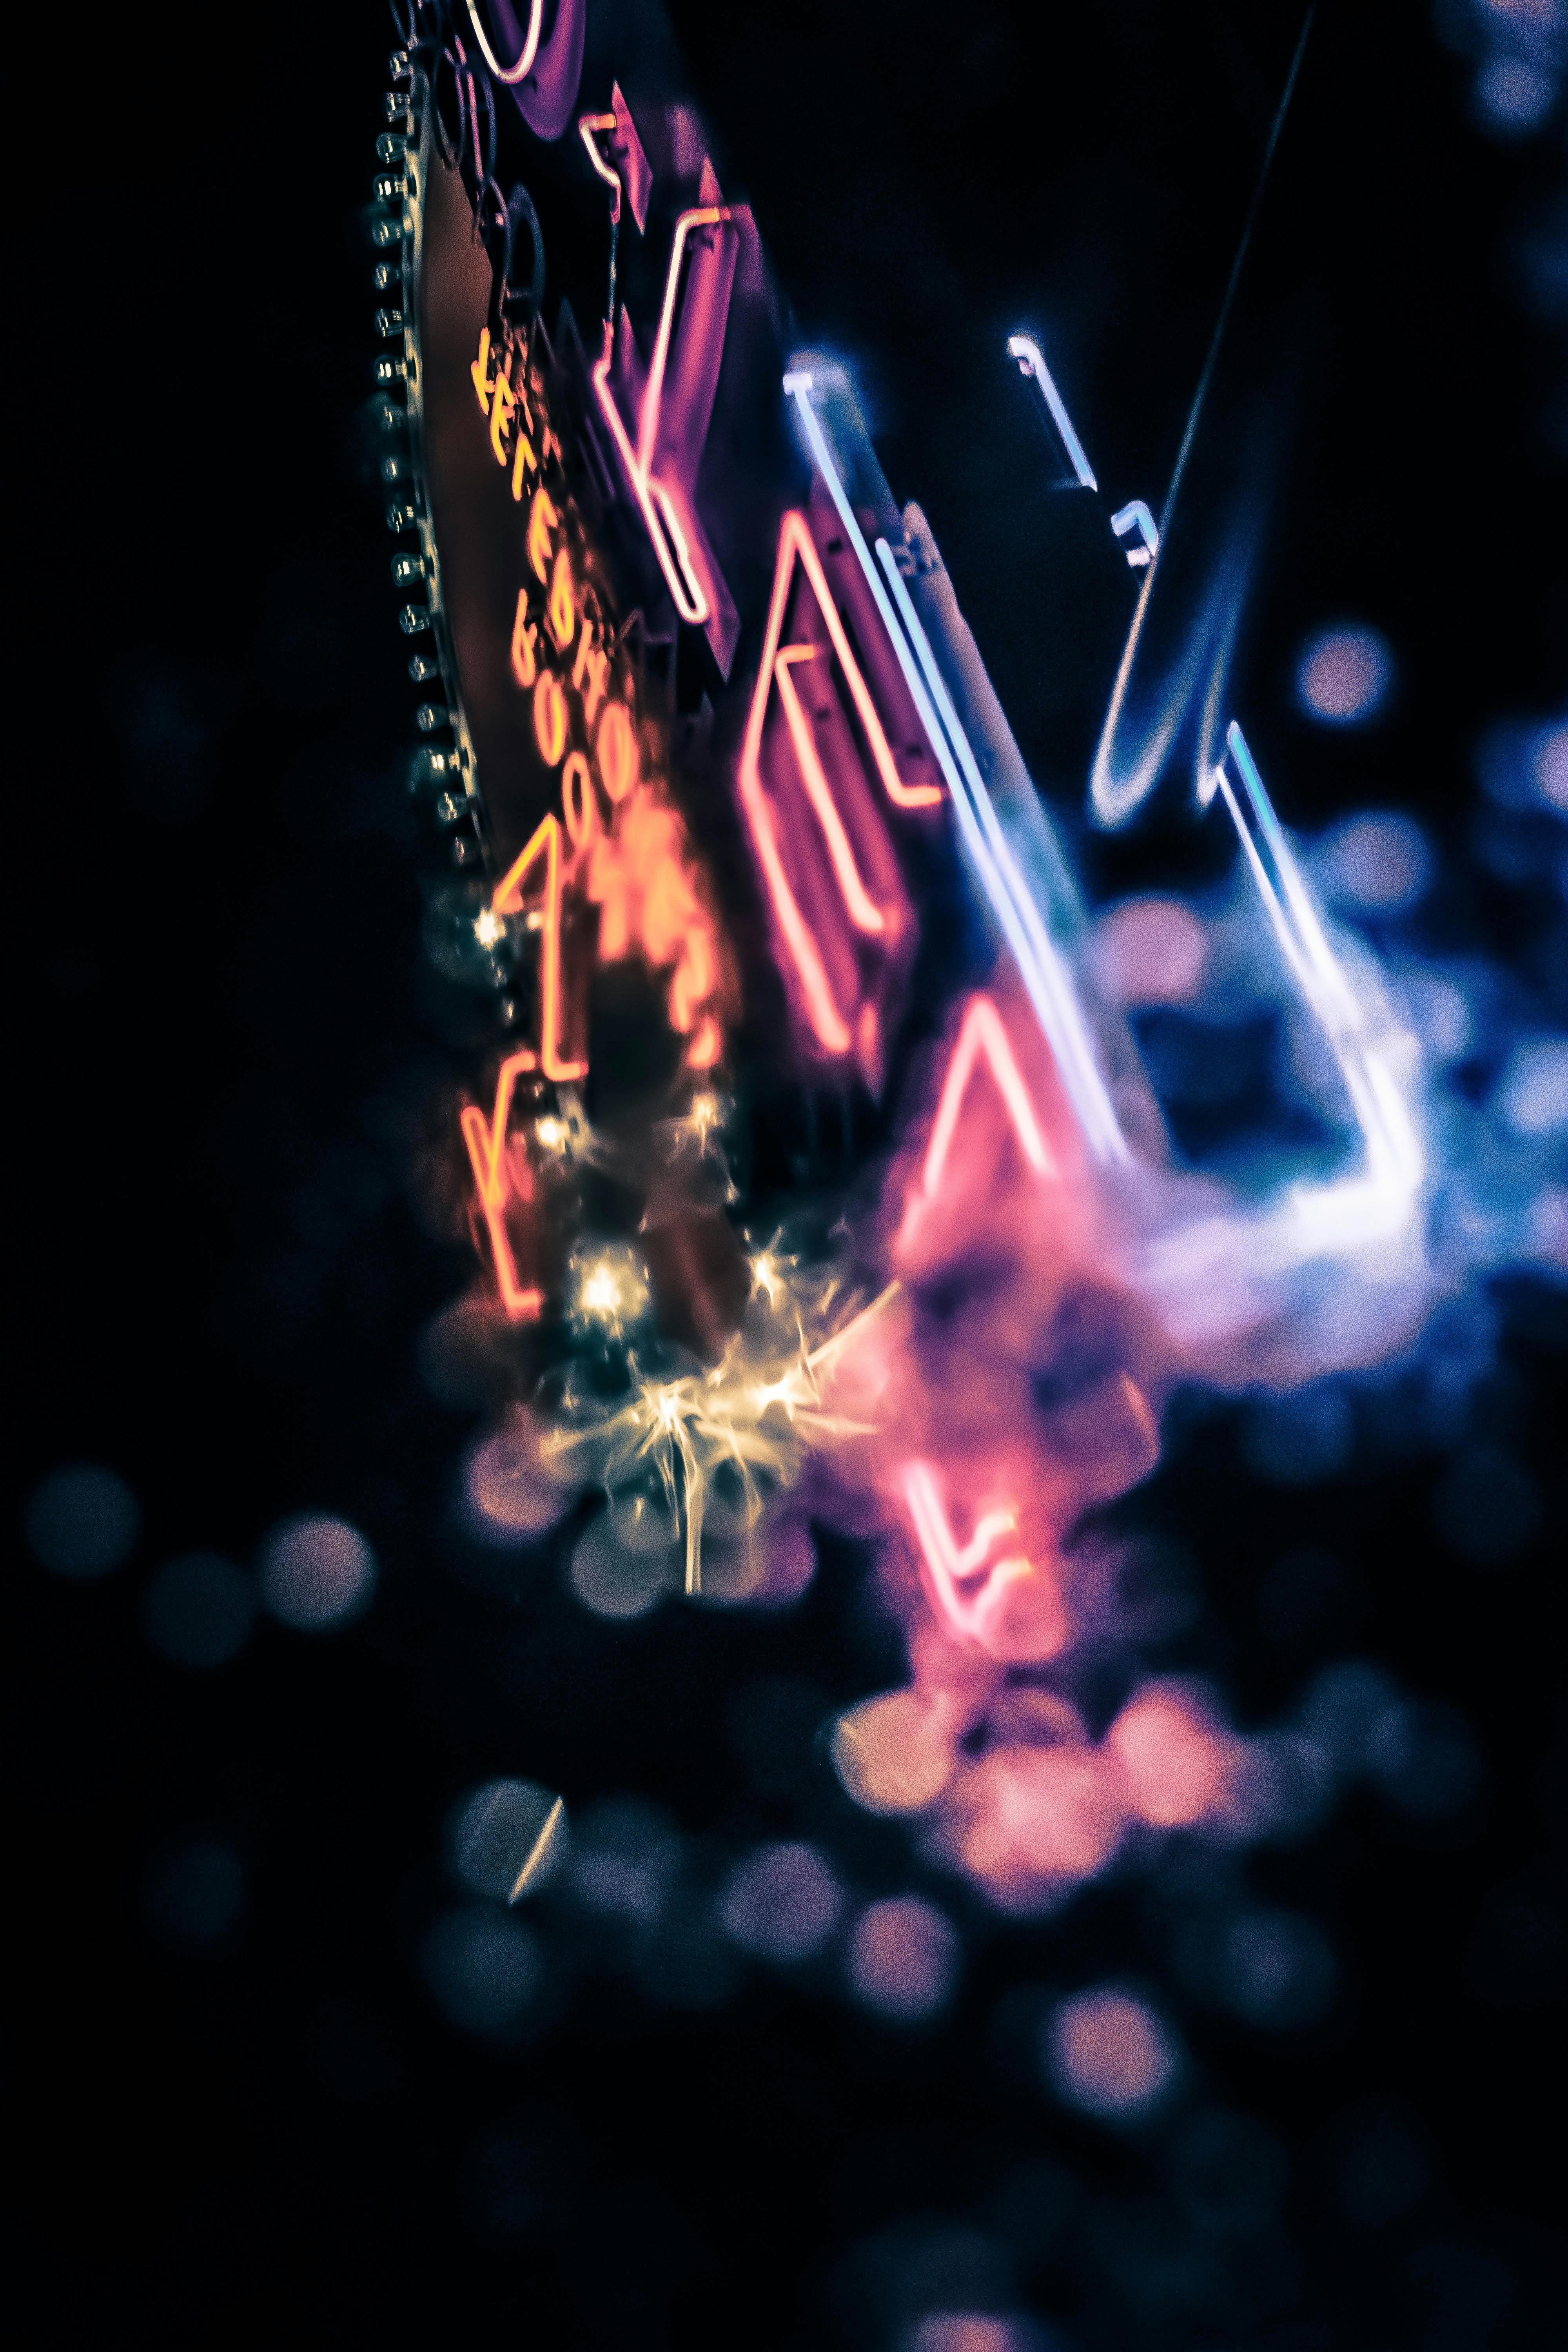 cool neon pictures in hd